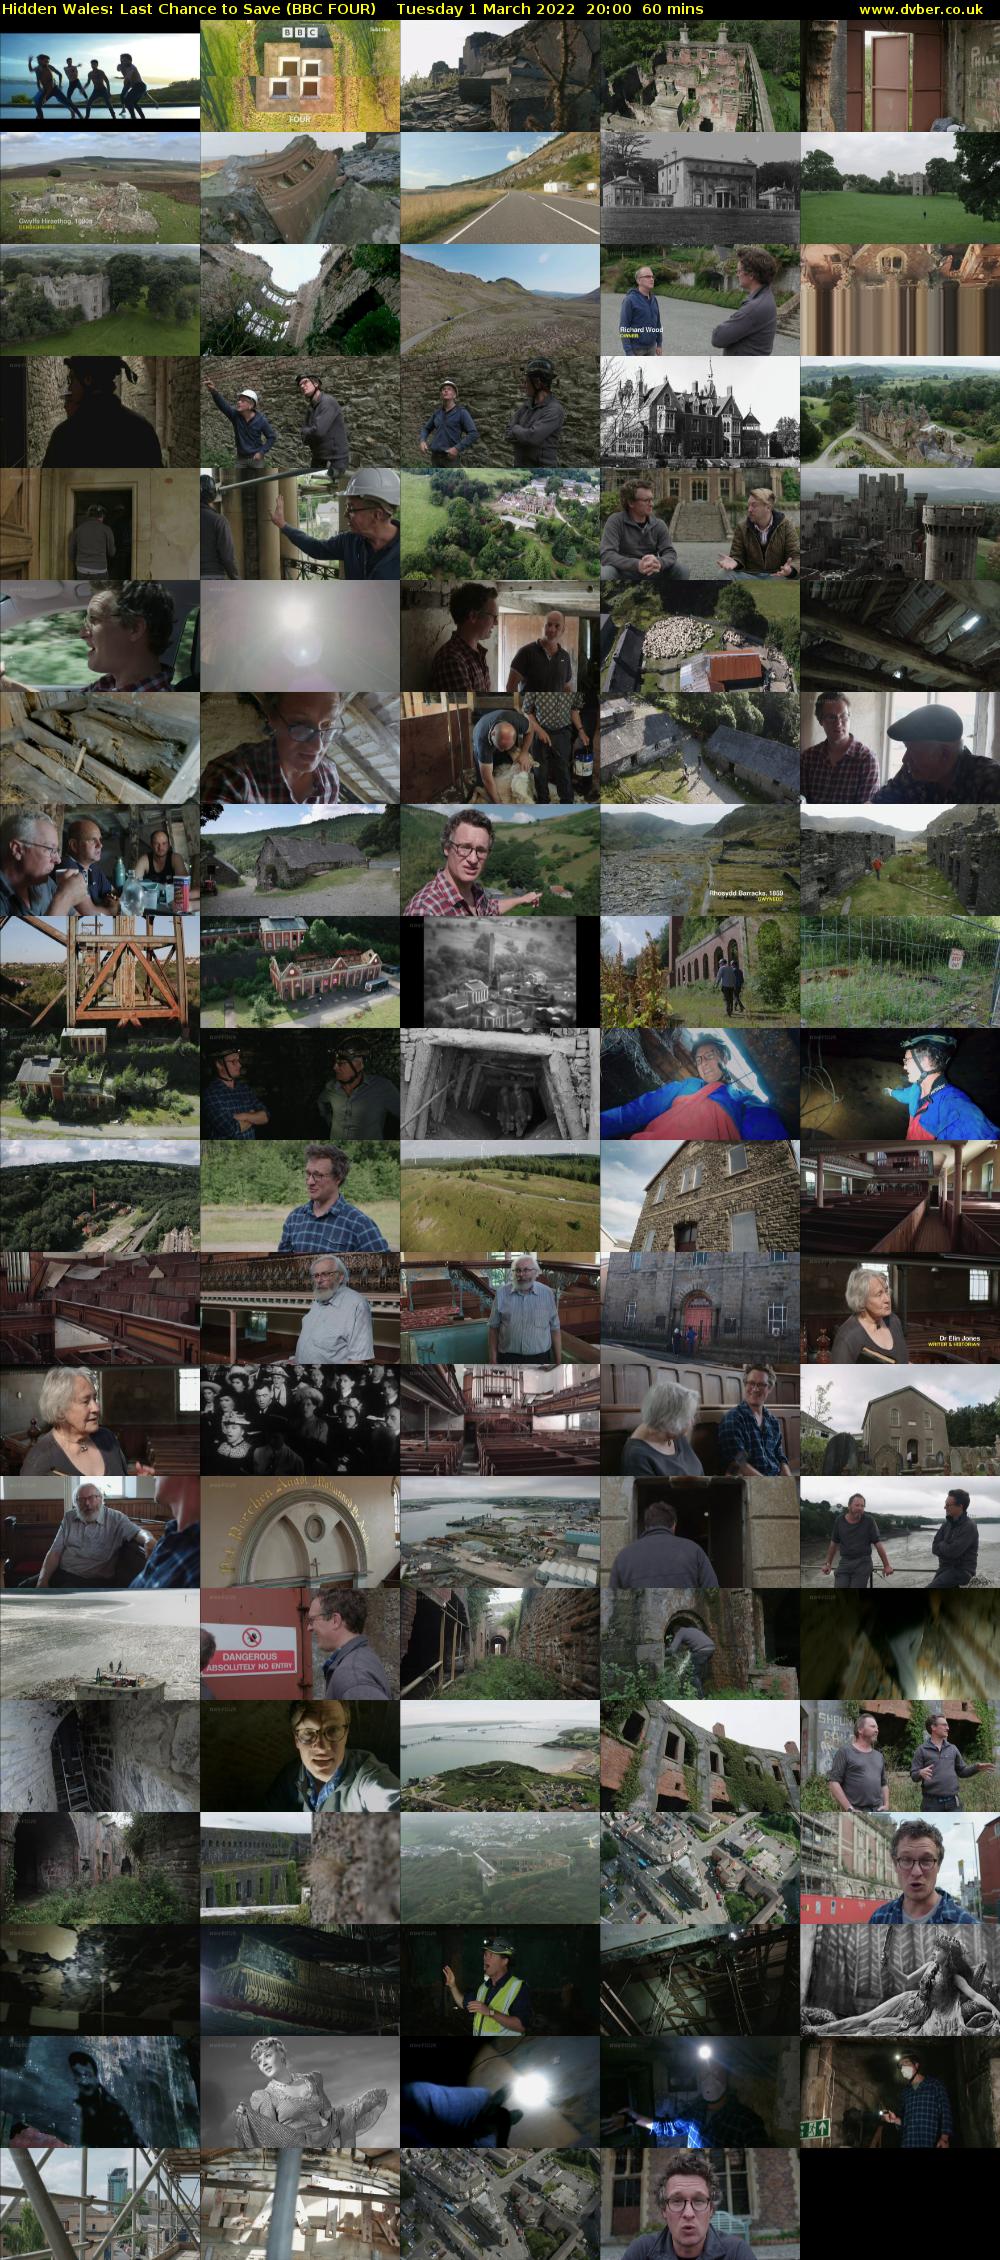 Hidden Wales: Last Chance to Save (BBC FOUR) Tuesday 1 March 2022 20:00 - 21:00